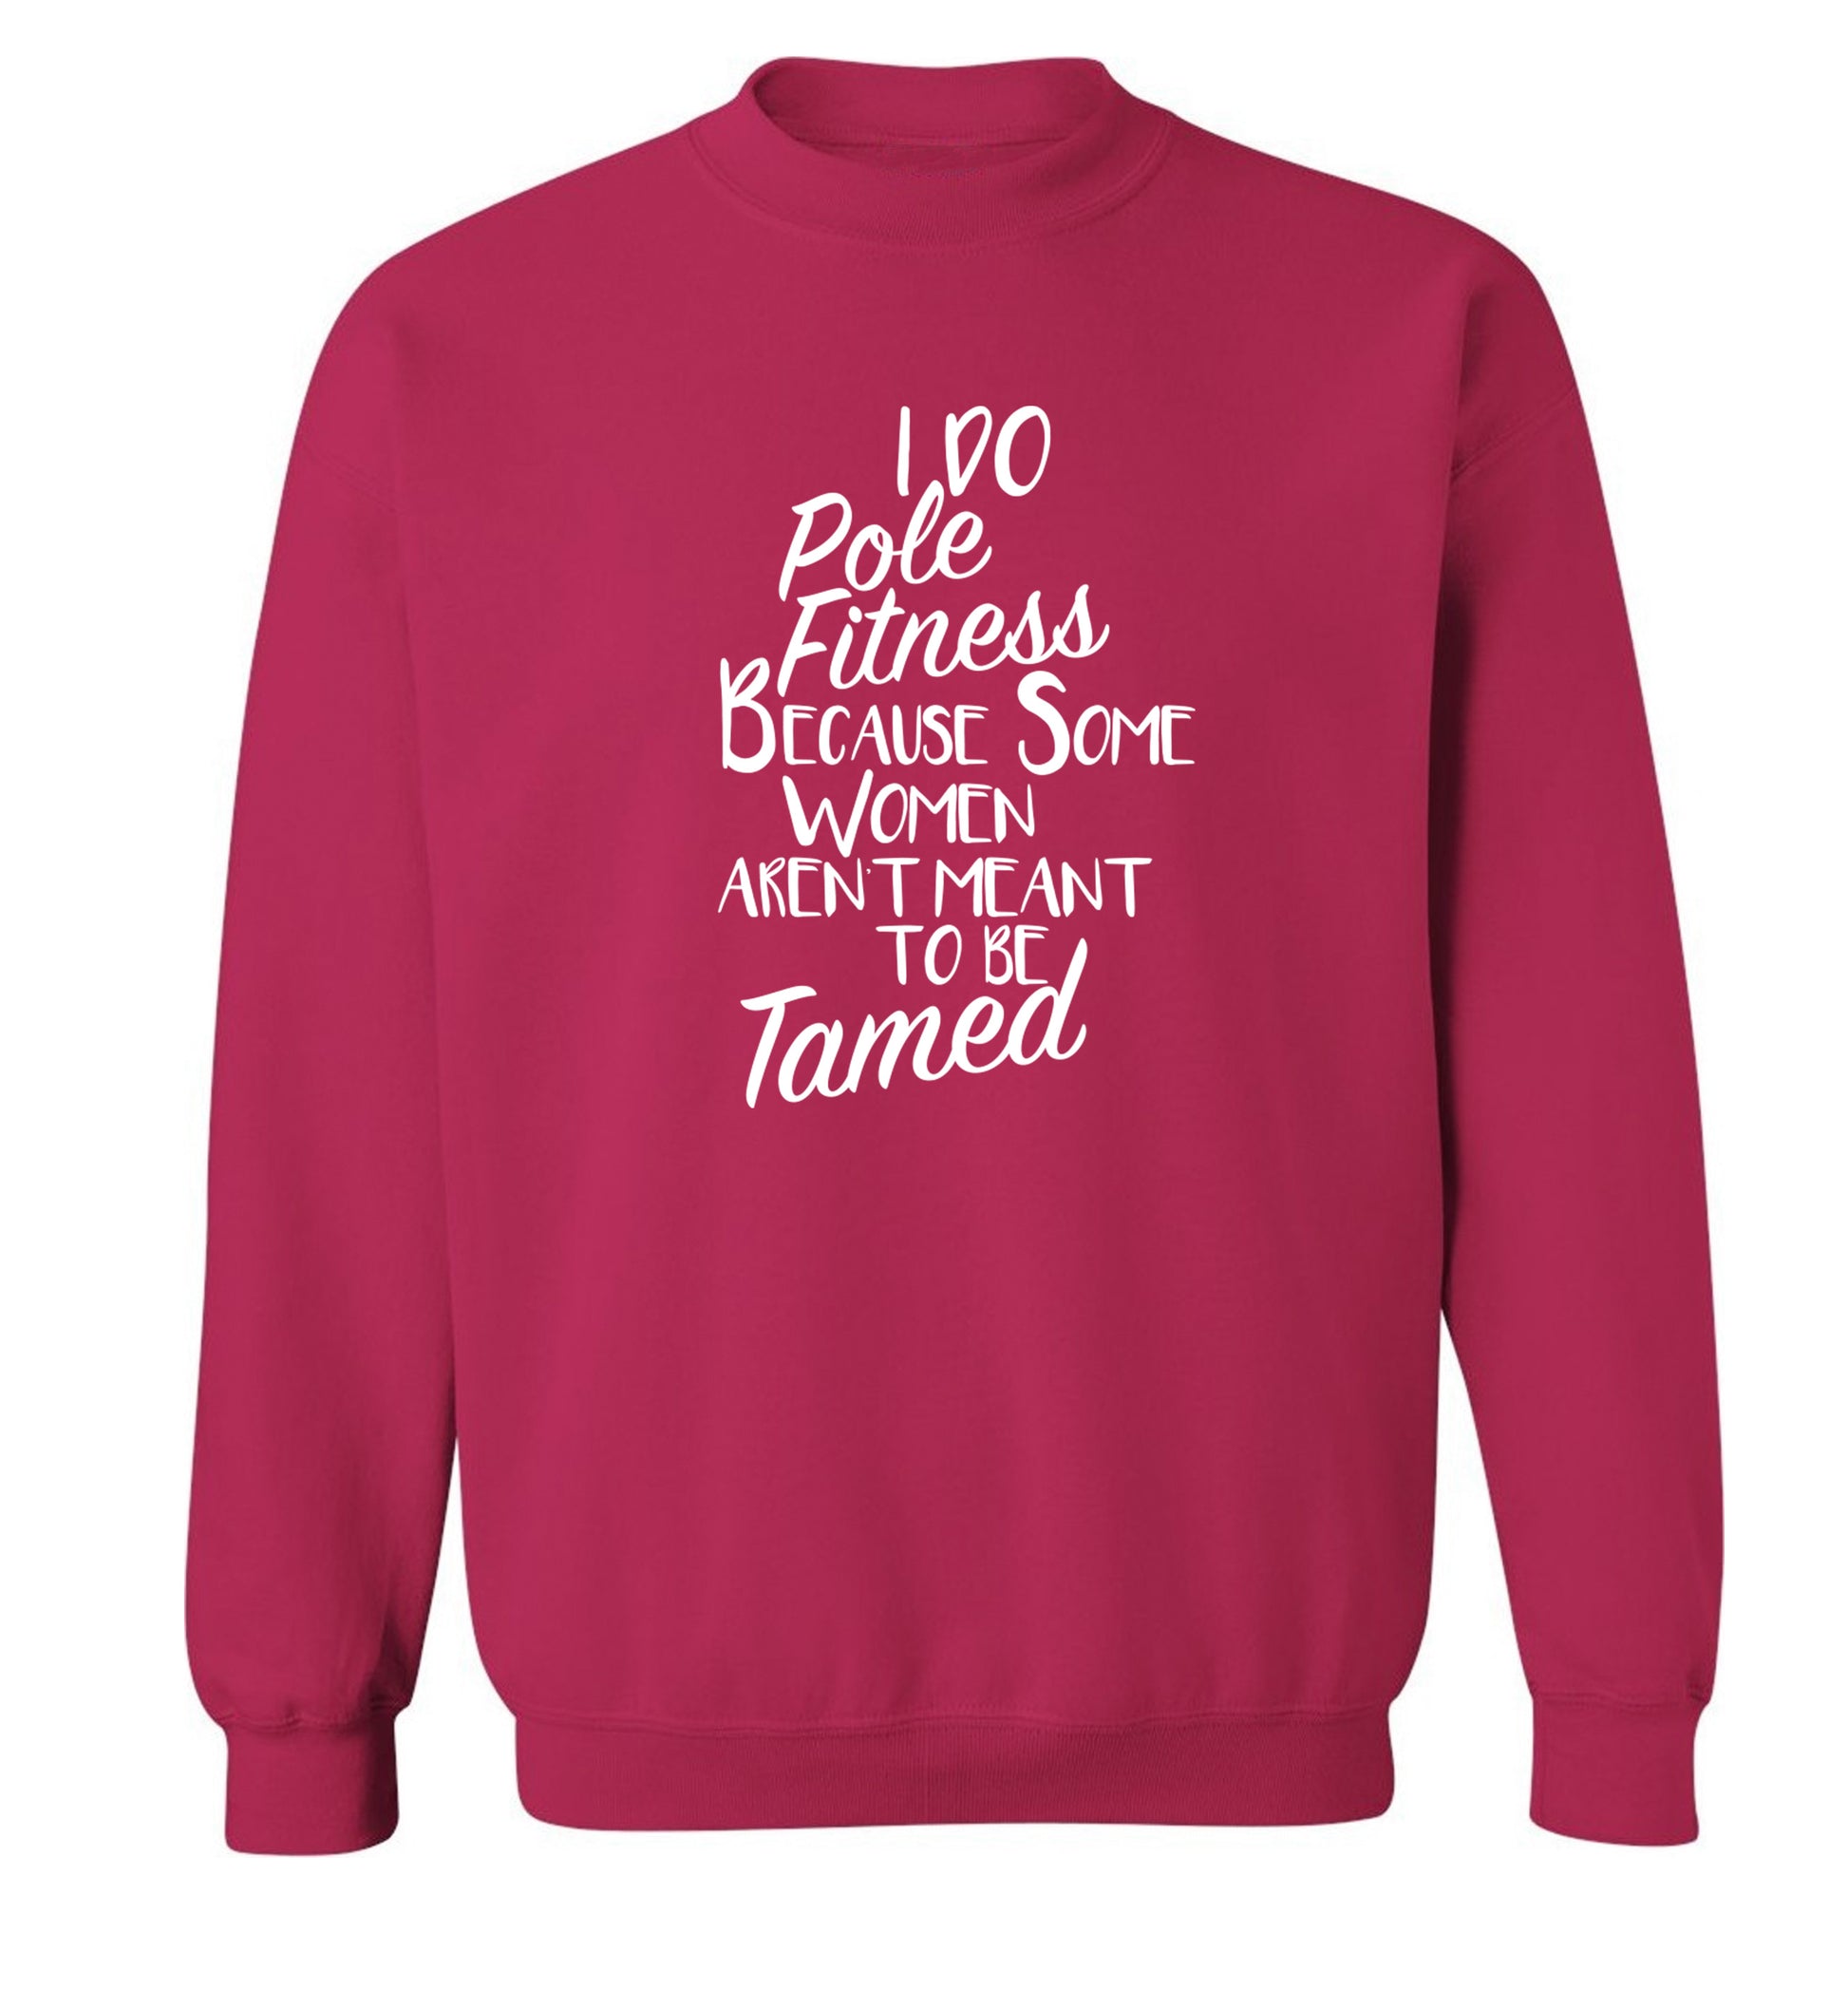 I do pole fitness because some women aren't meant to be tamed Adult's unisex pink Sweater 2XL